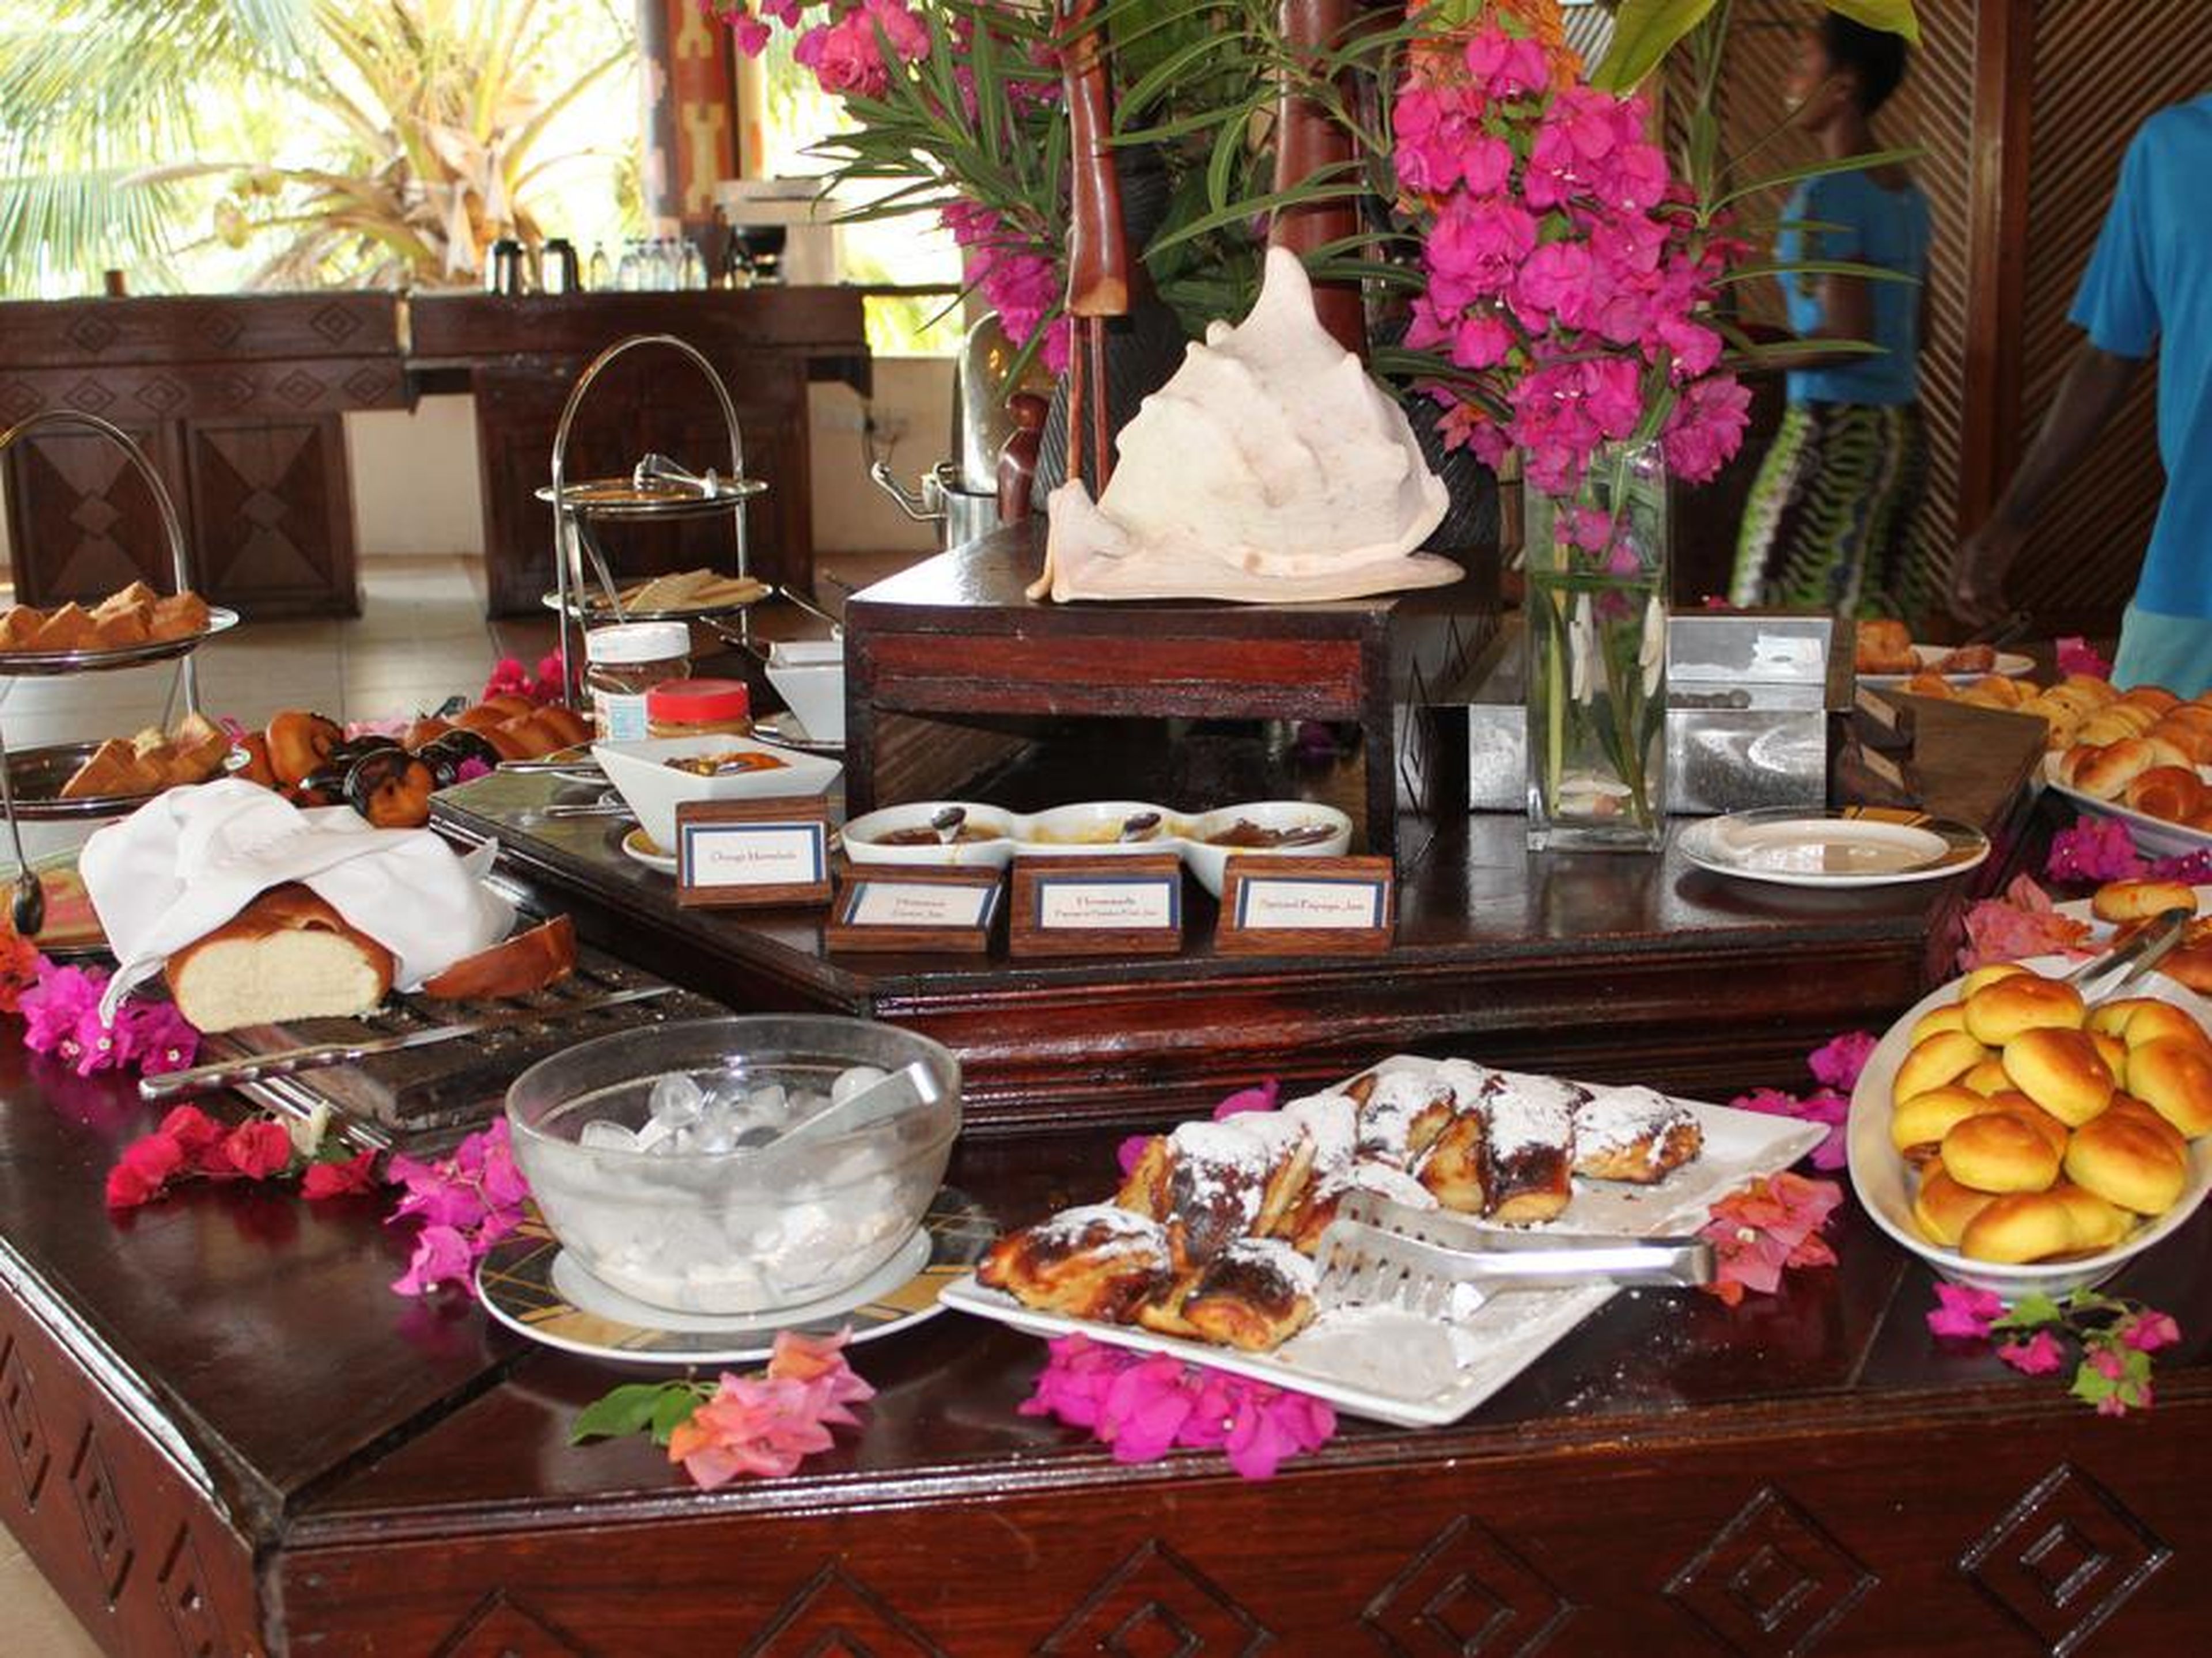 The breakfast included with the package is often served buffet-style.